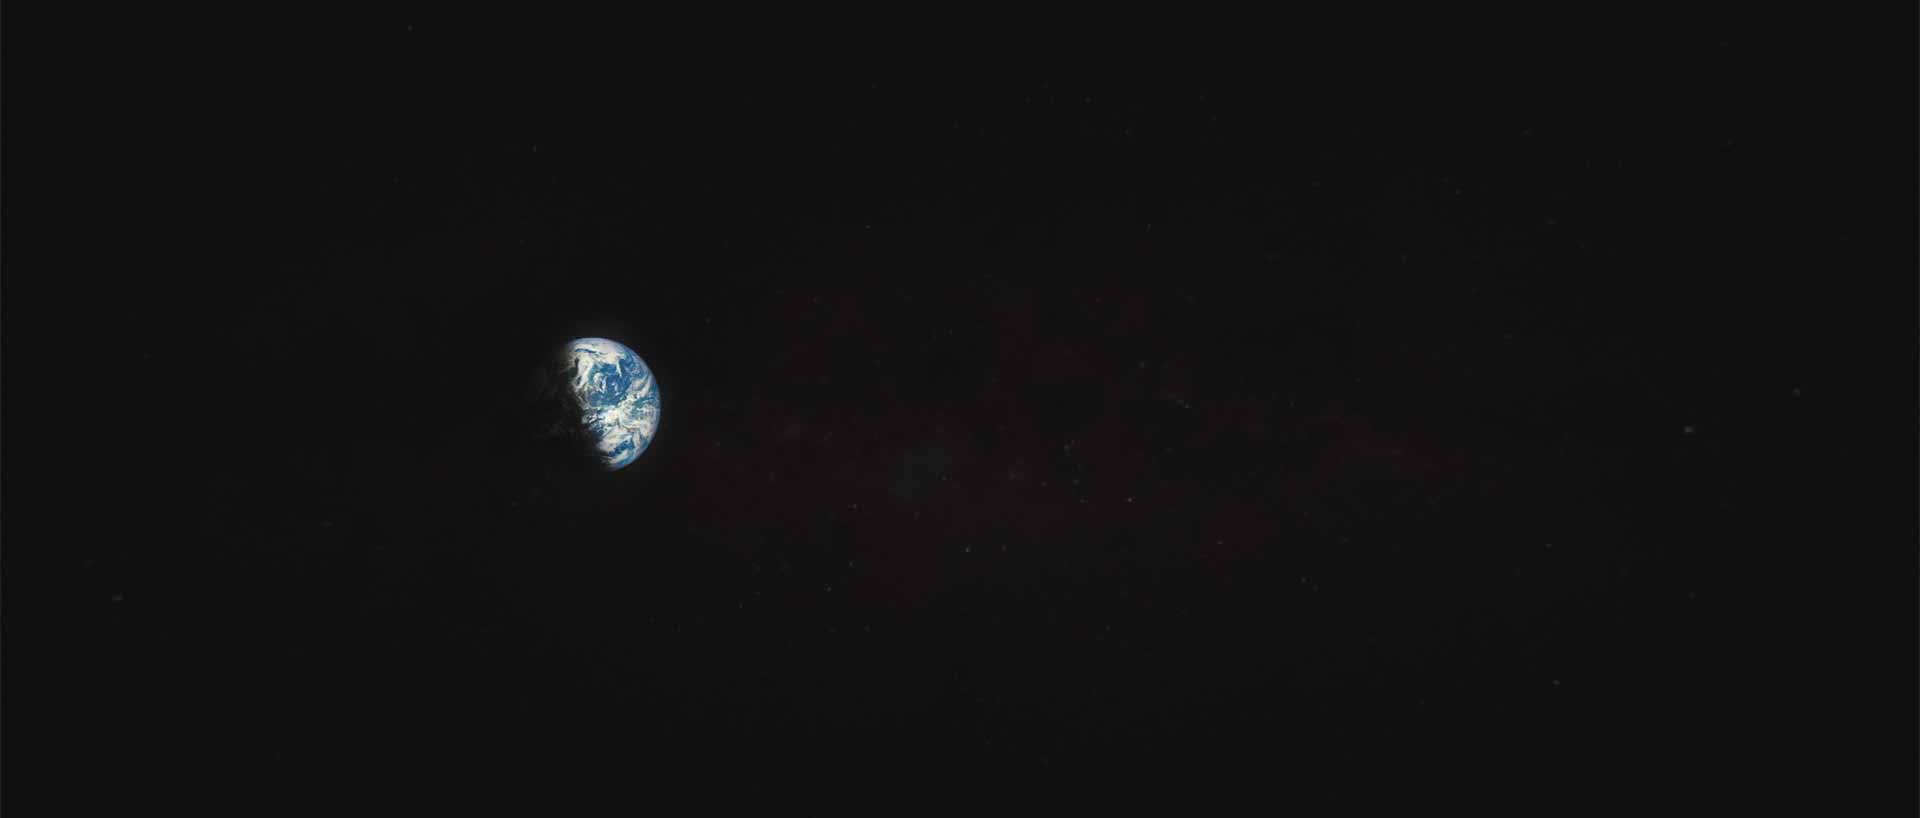 The Earth, from space